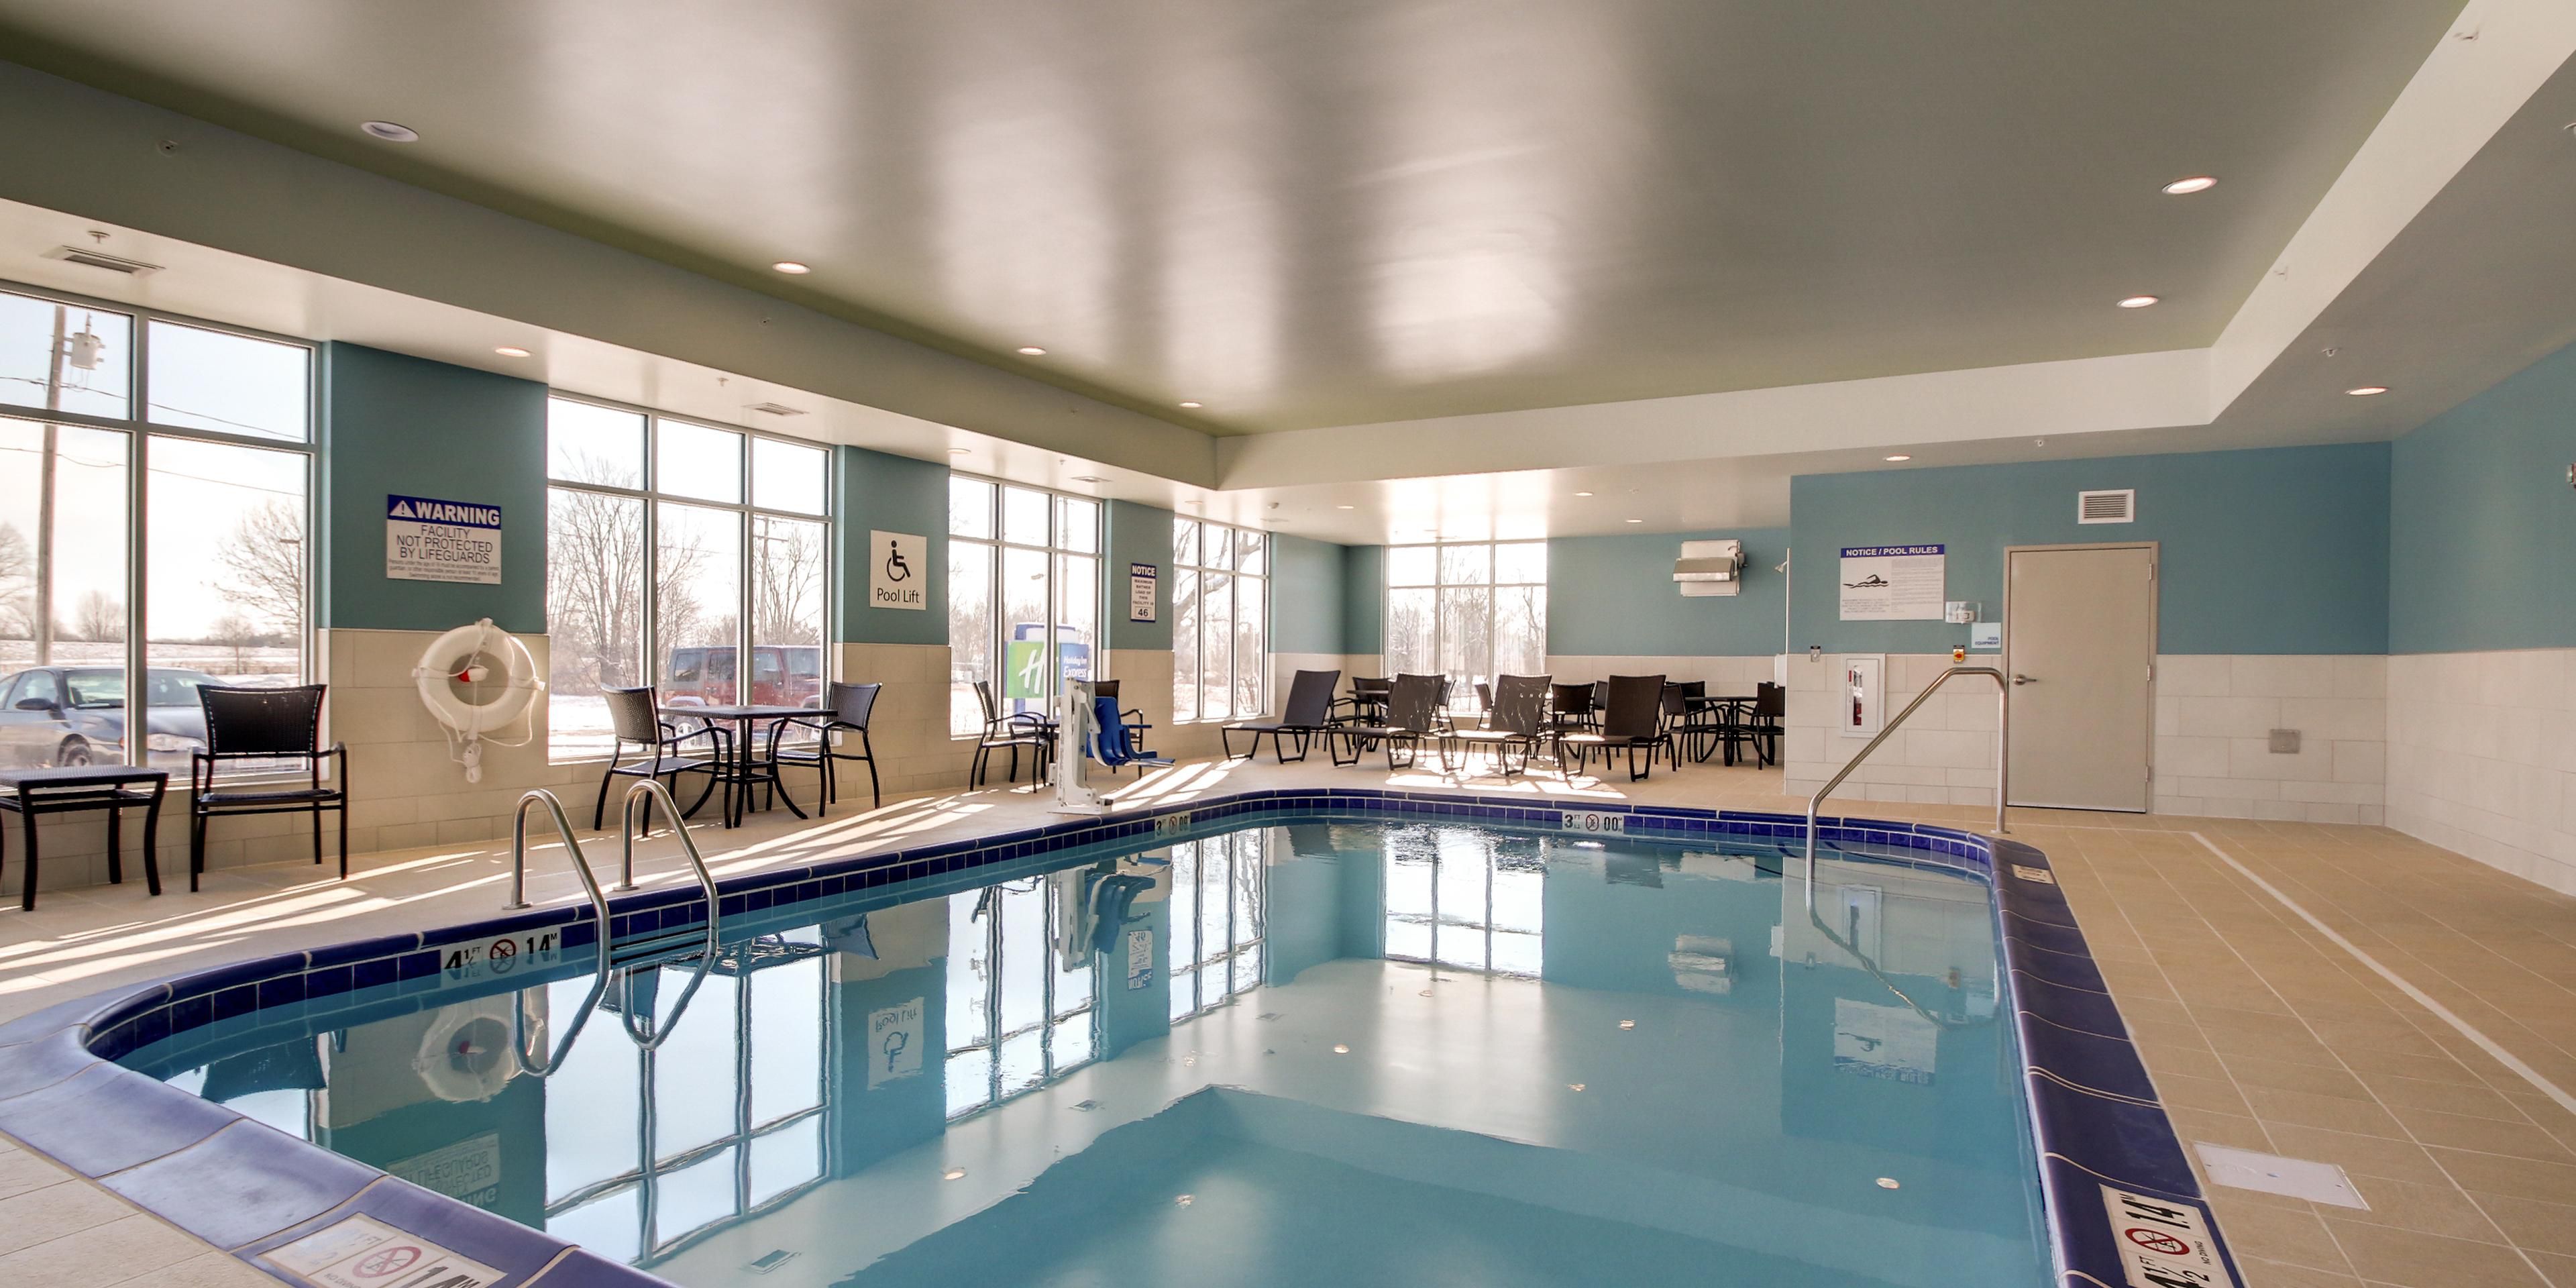 Take a dip in our indoor, heated swimming pool.  Keep up with your fitness routine and get some laps in or make a splash with the kids. 